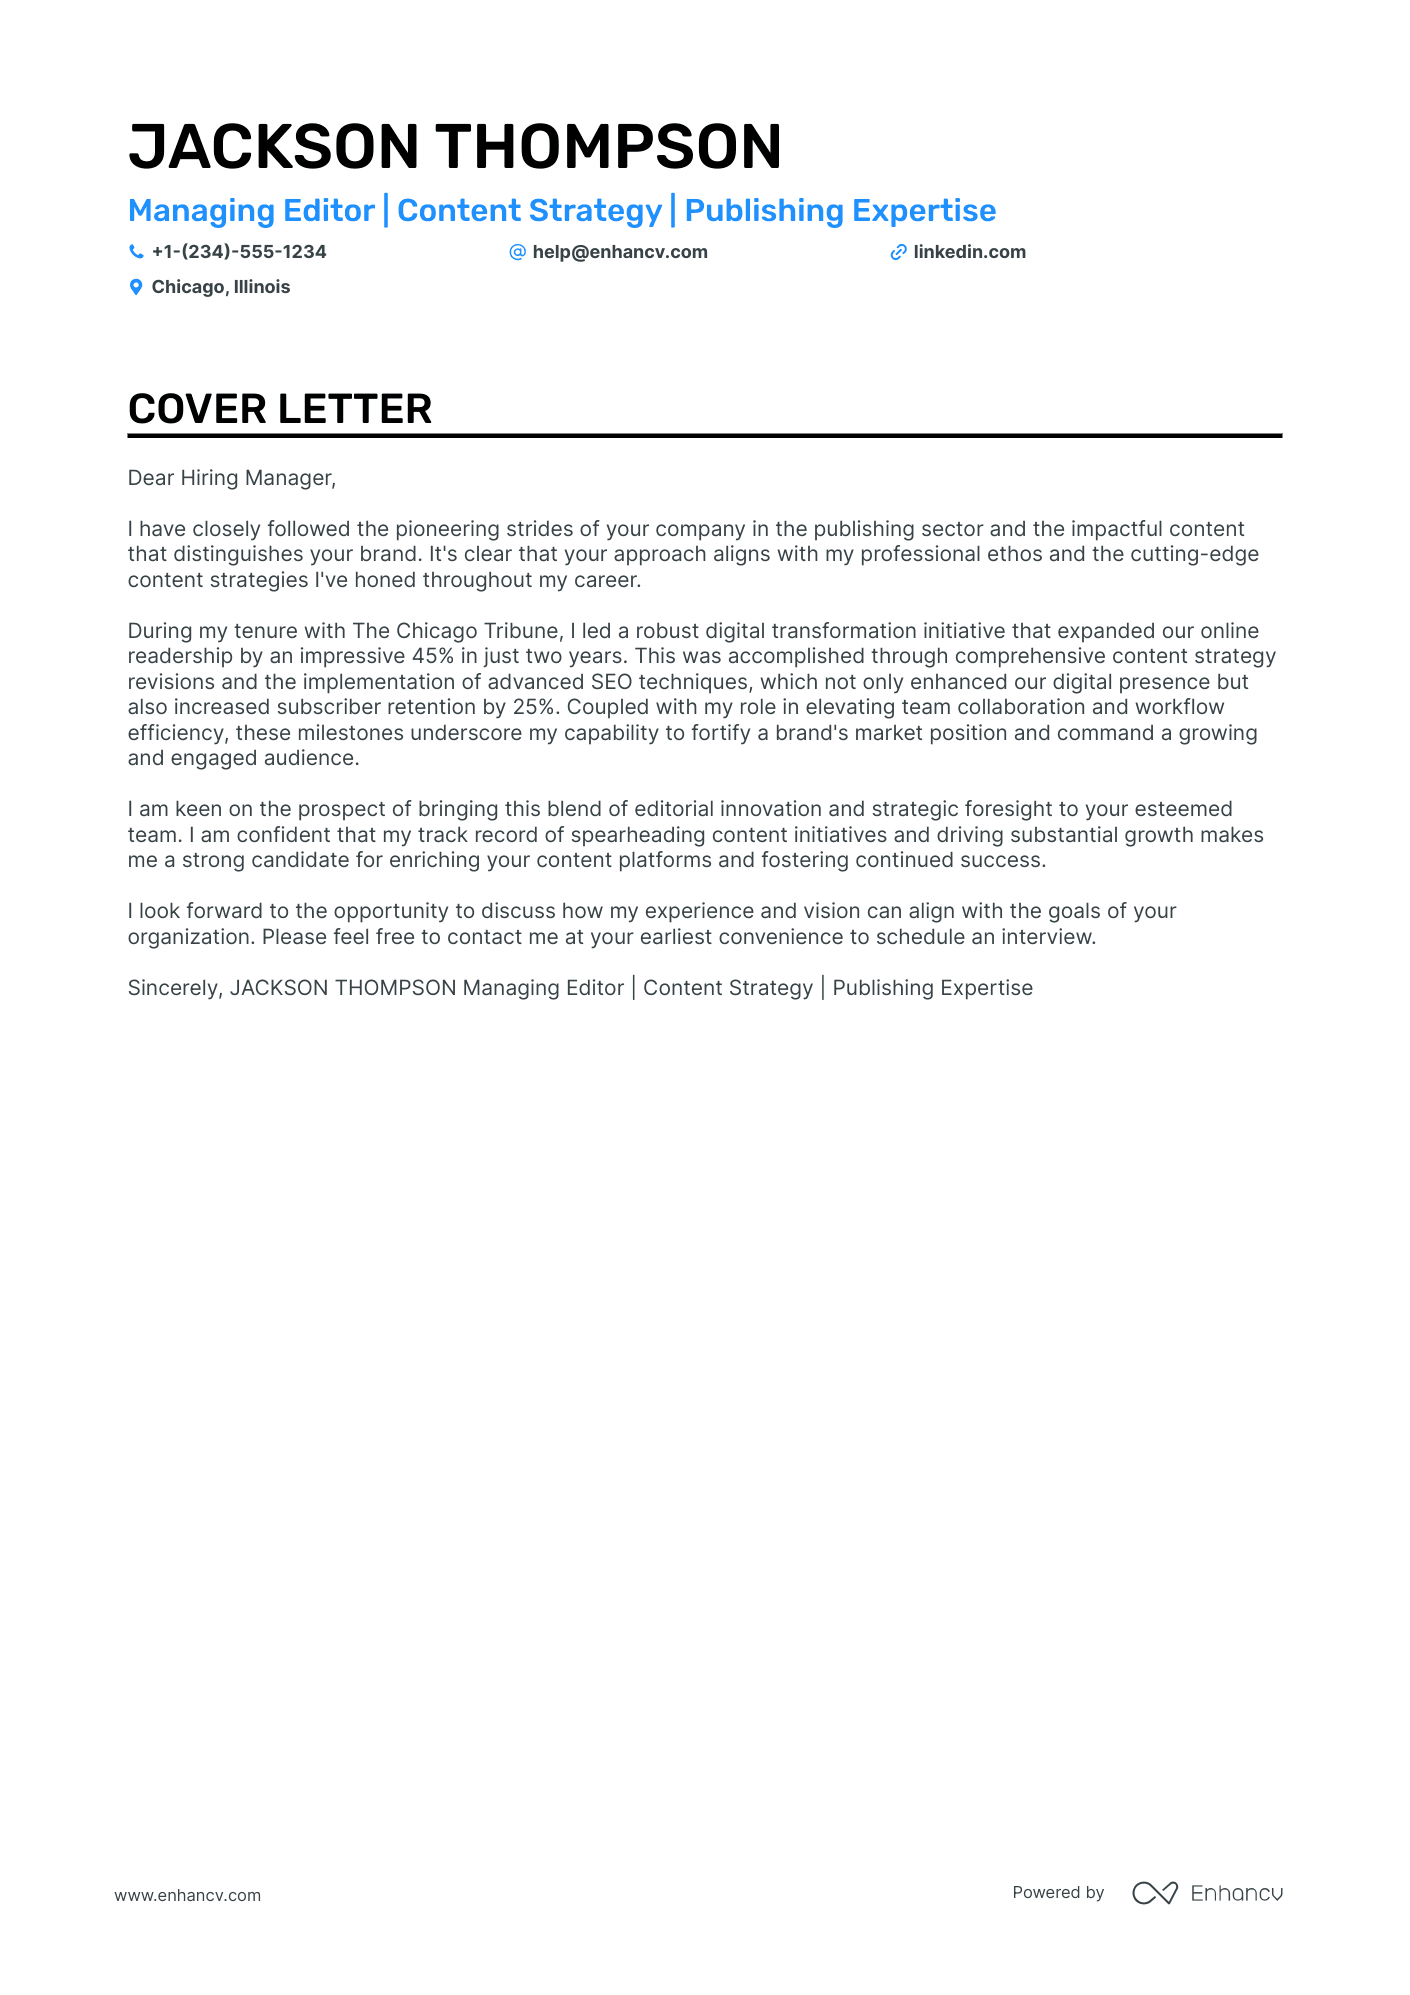 Editor cover letter